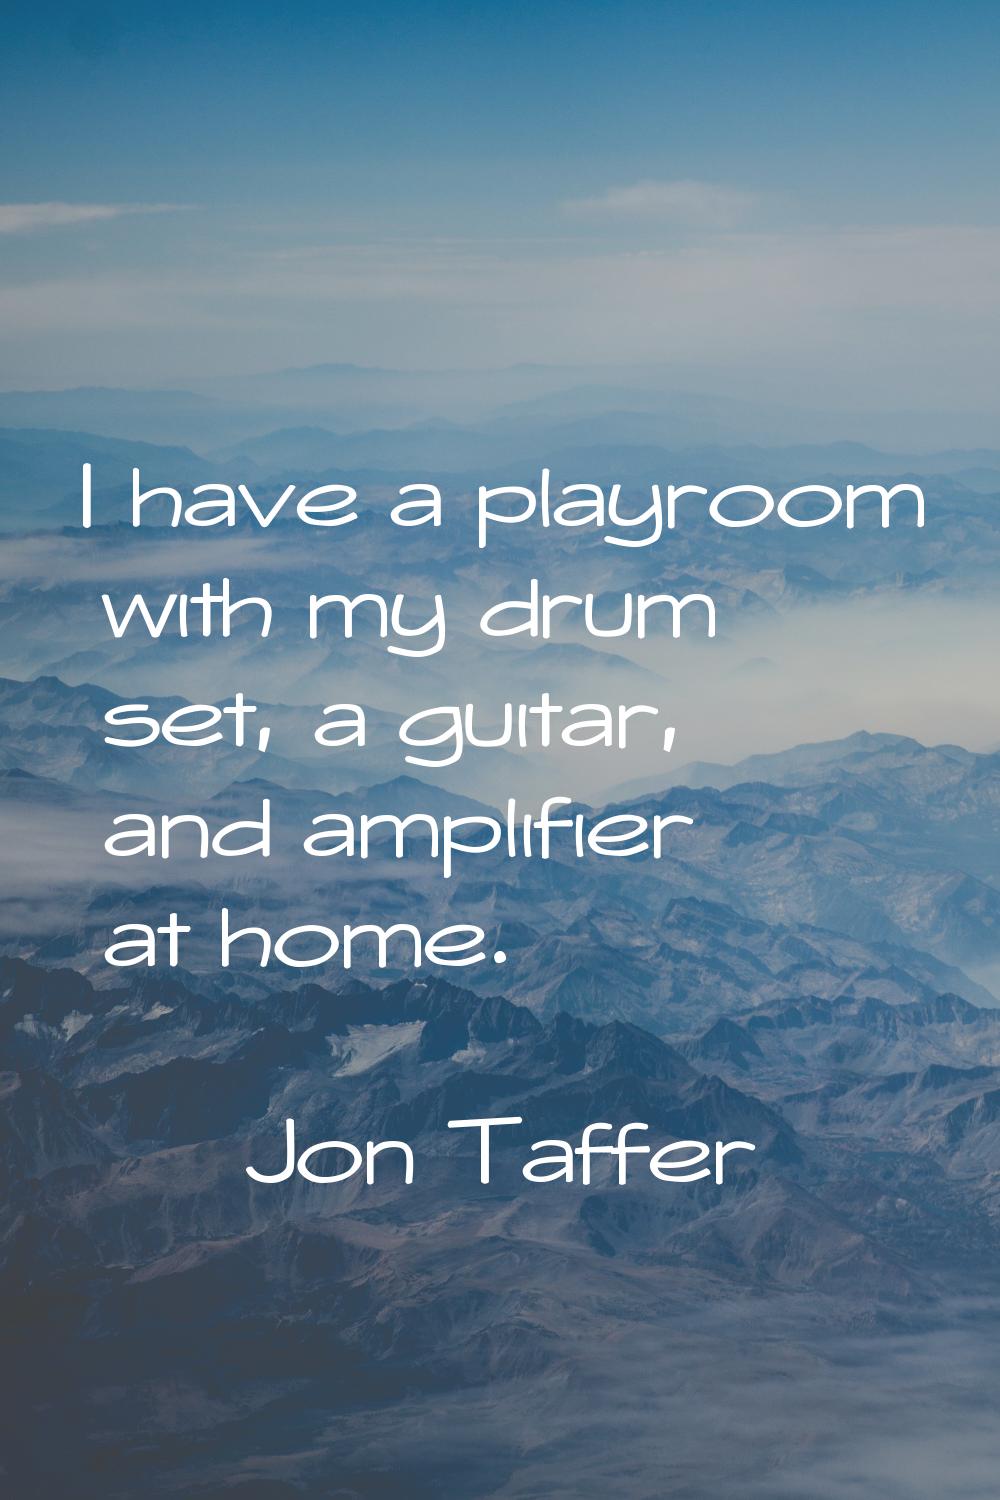 I have a playroom with my drum set, a guitar, and amplifier at home.